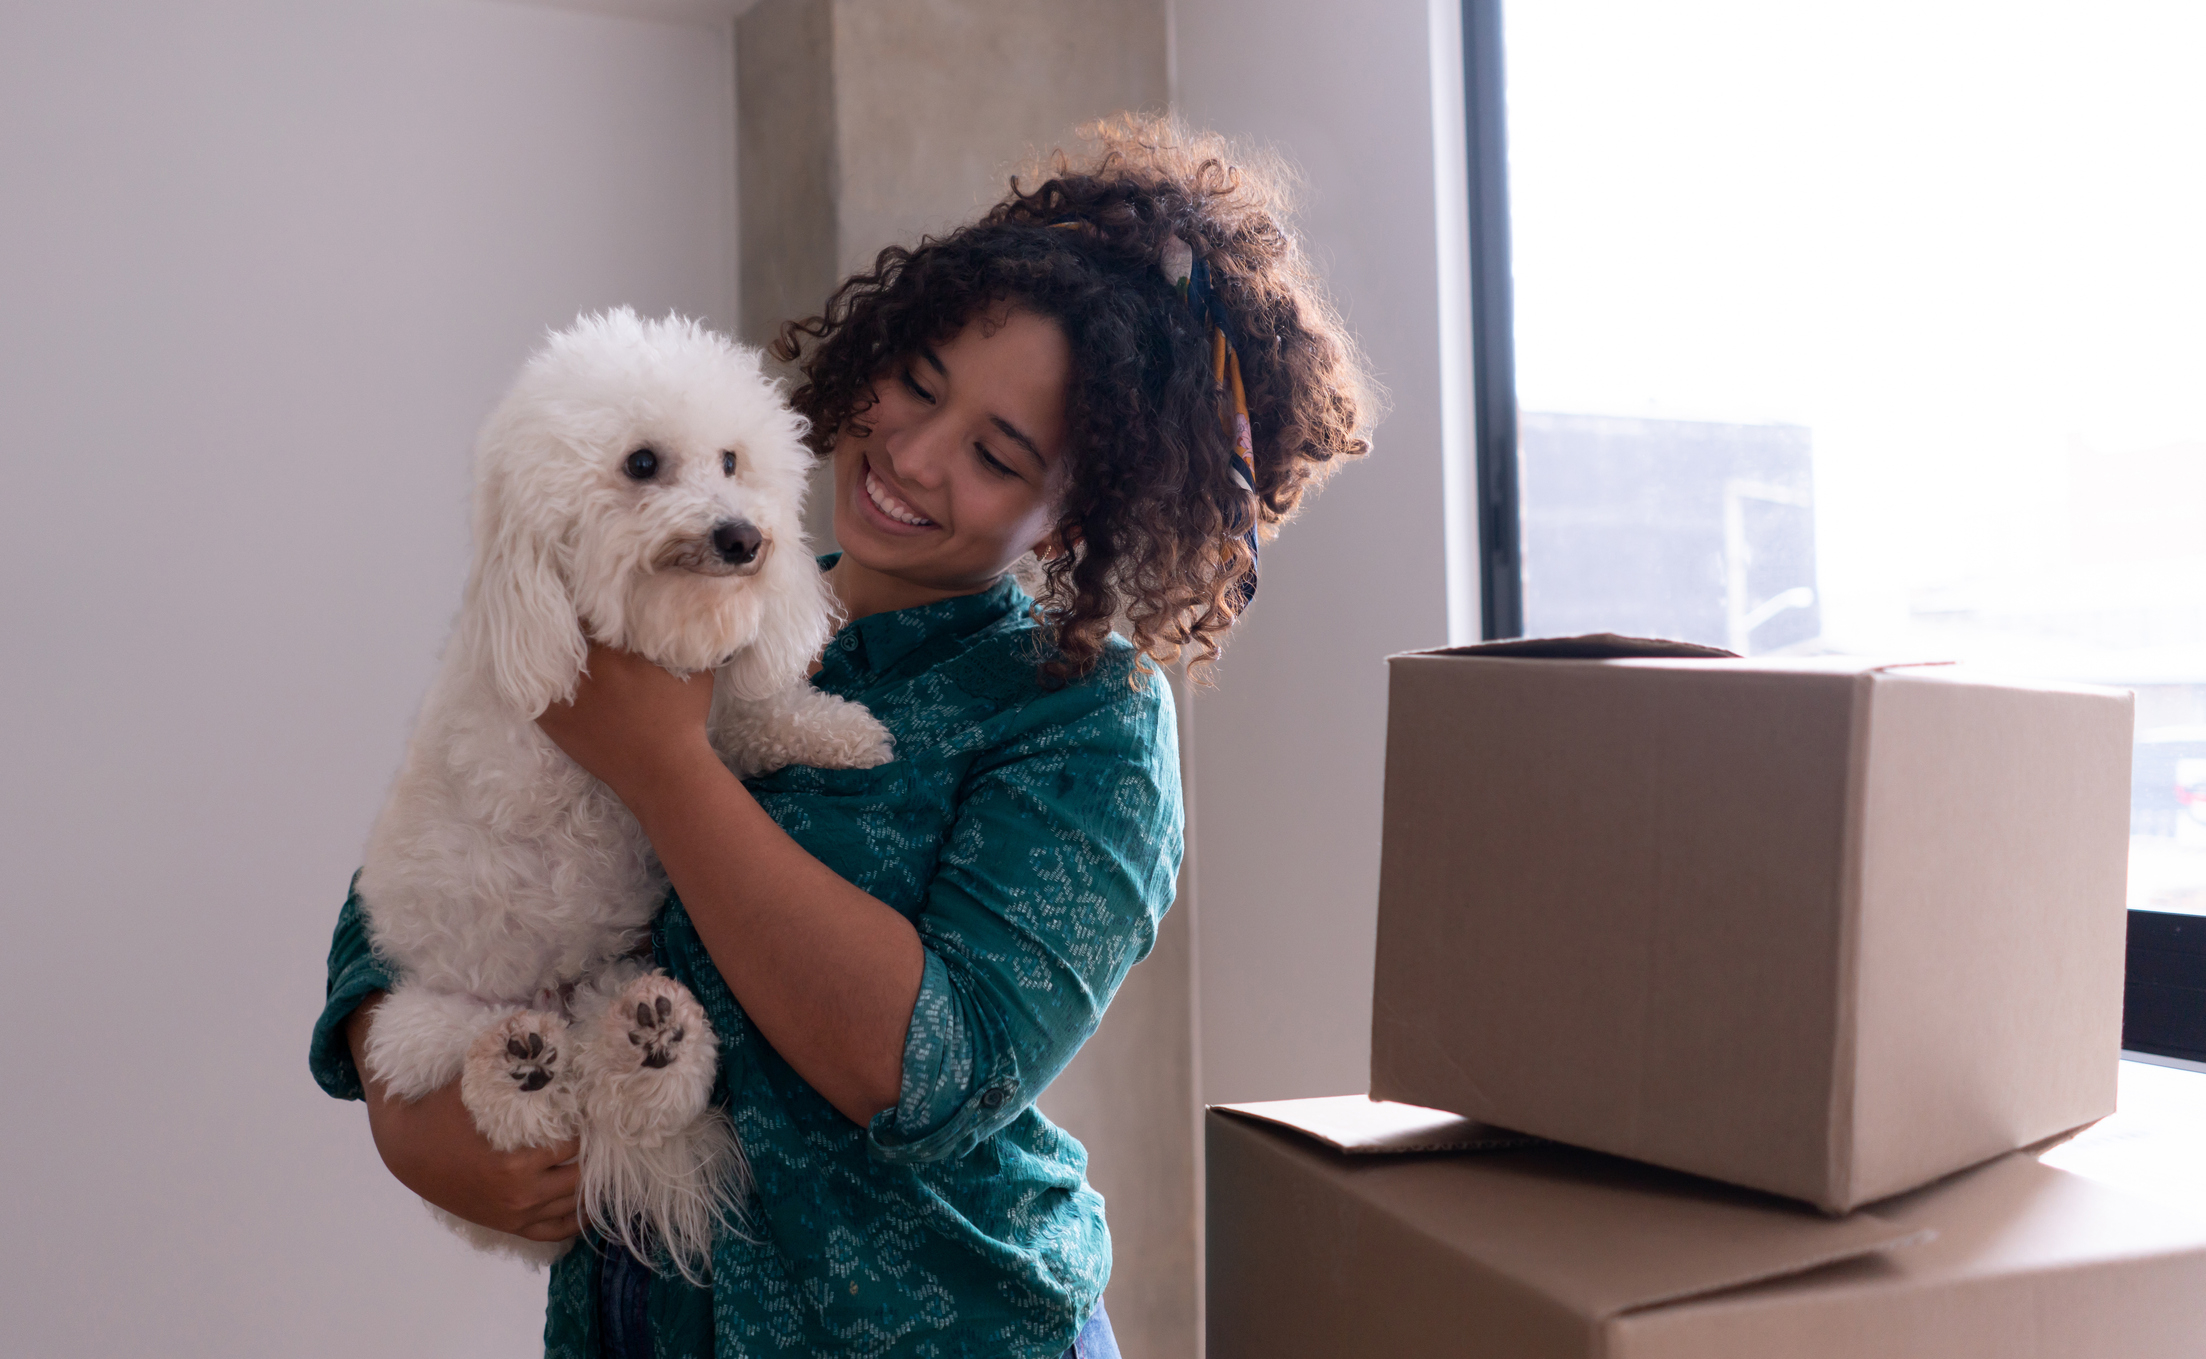 Woman embracing a dog with affection, standing near a cardboard packing box in a room